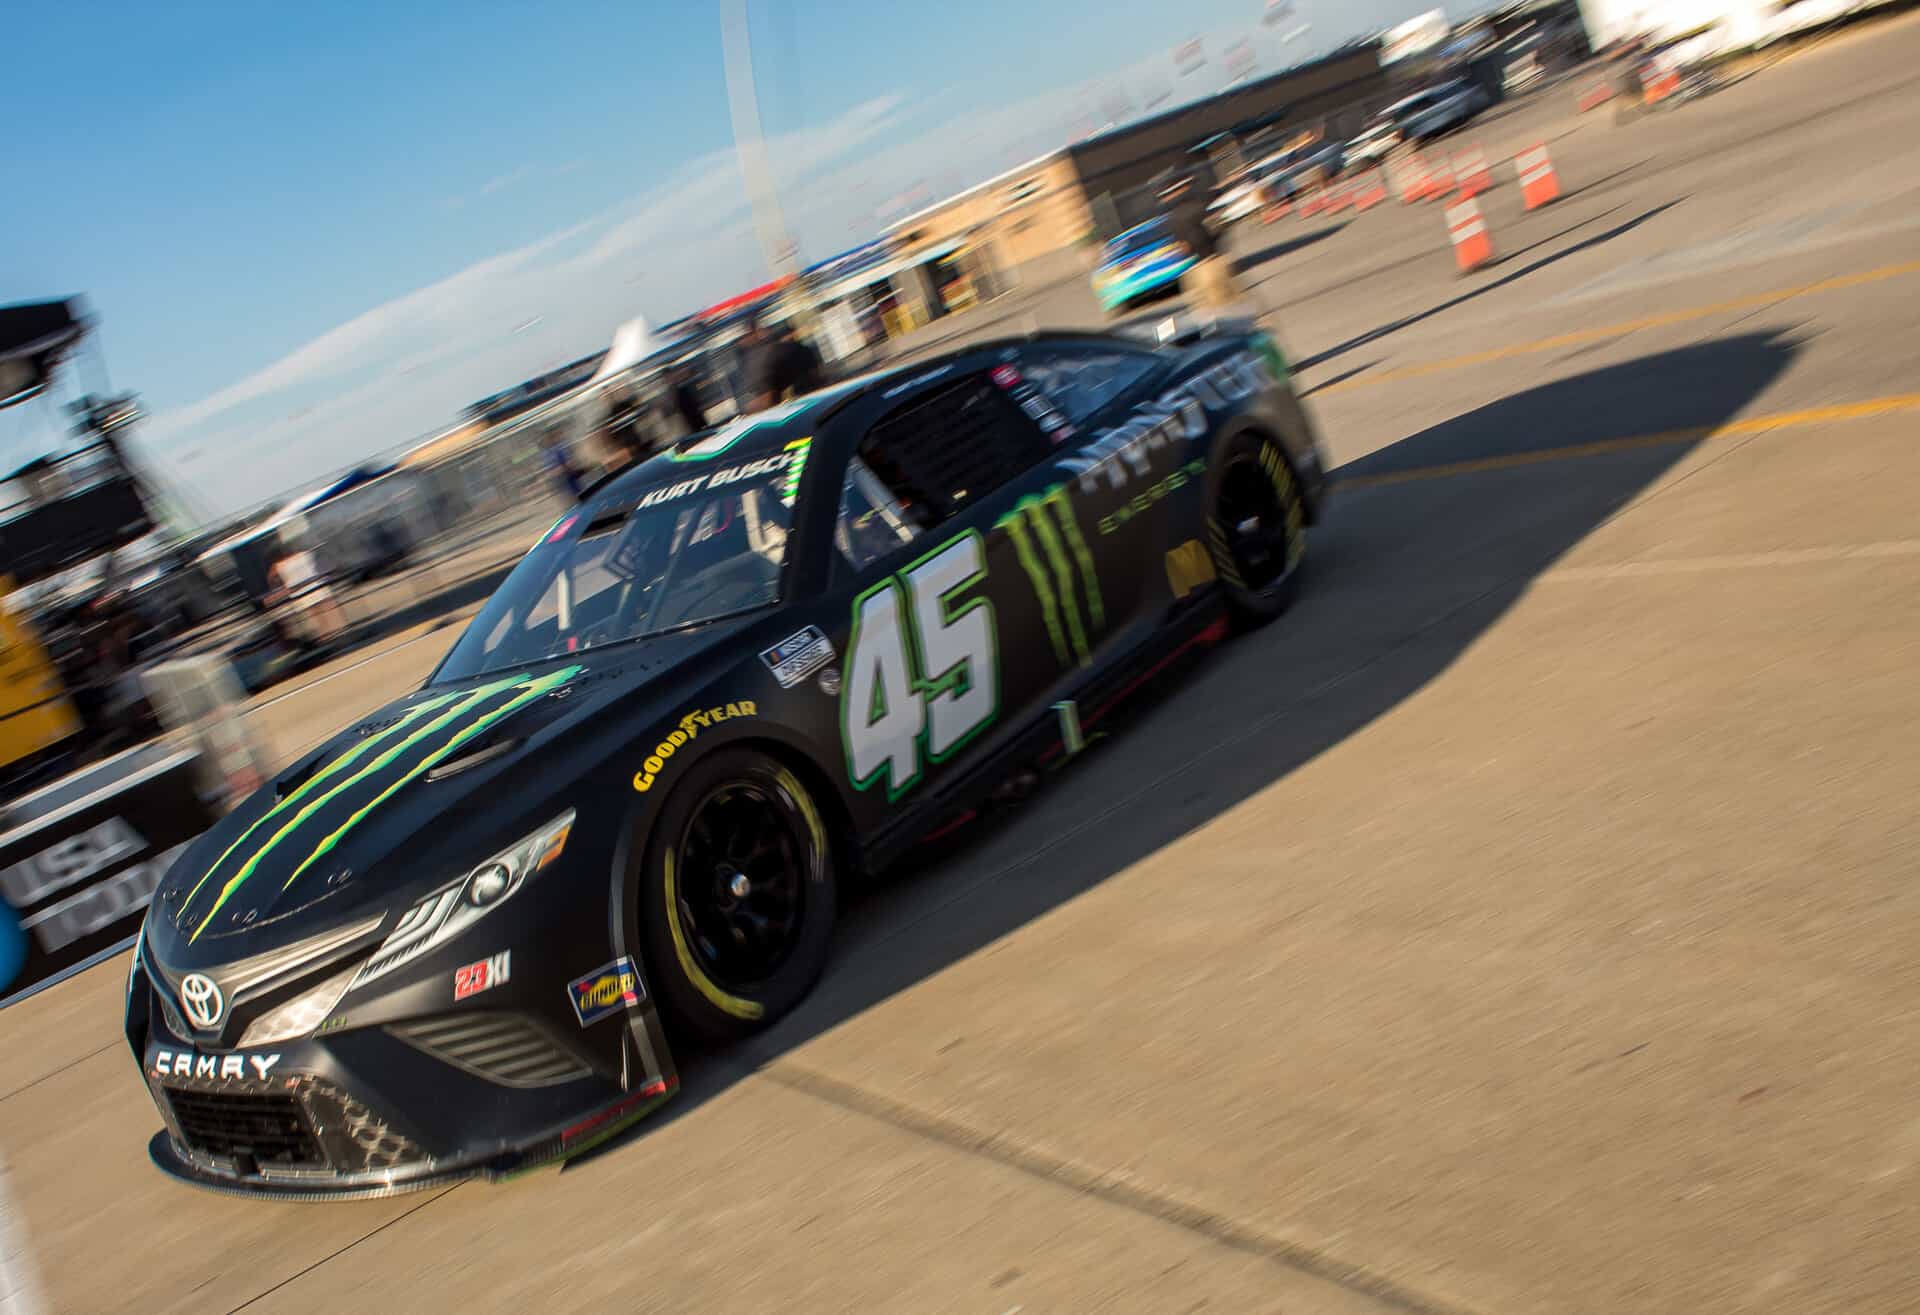 Bettors have put a lot of money on kurt busch to win the nascar race at nashville superspeedway this weekend. Photo by christian koelle/kickin' the tires